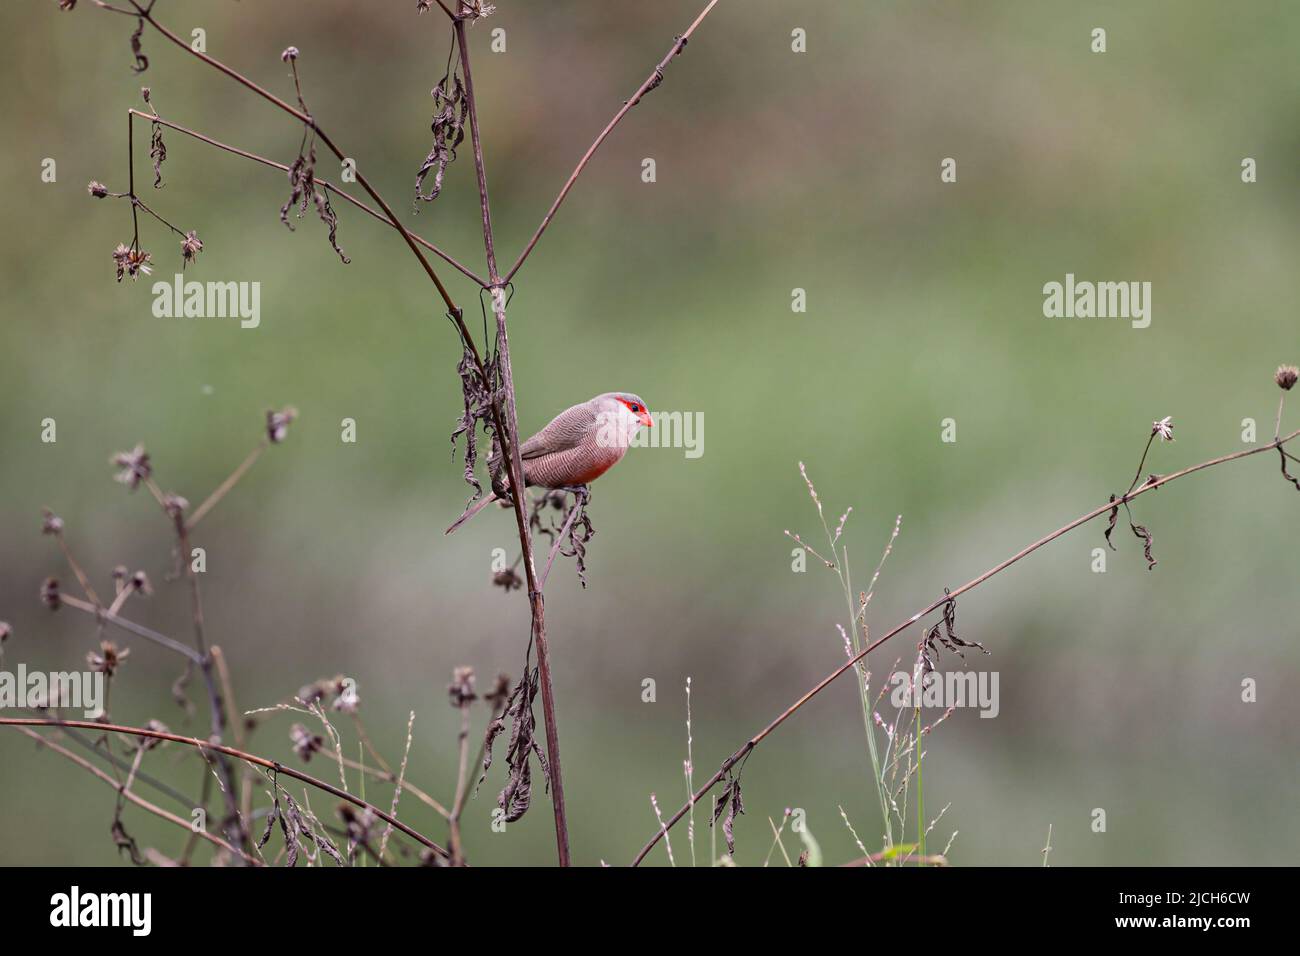 Common waxbills looking for food among the grass on the bank of a river Stock Photo